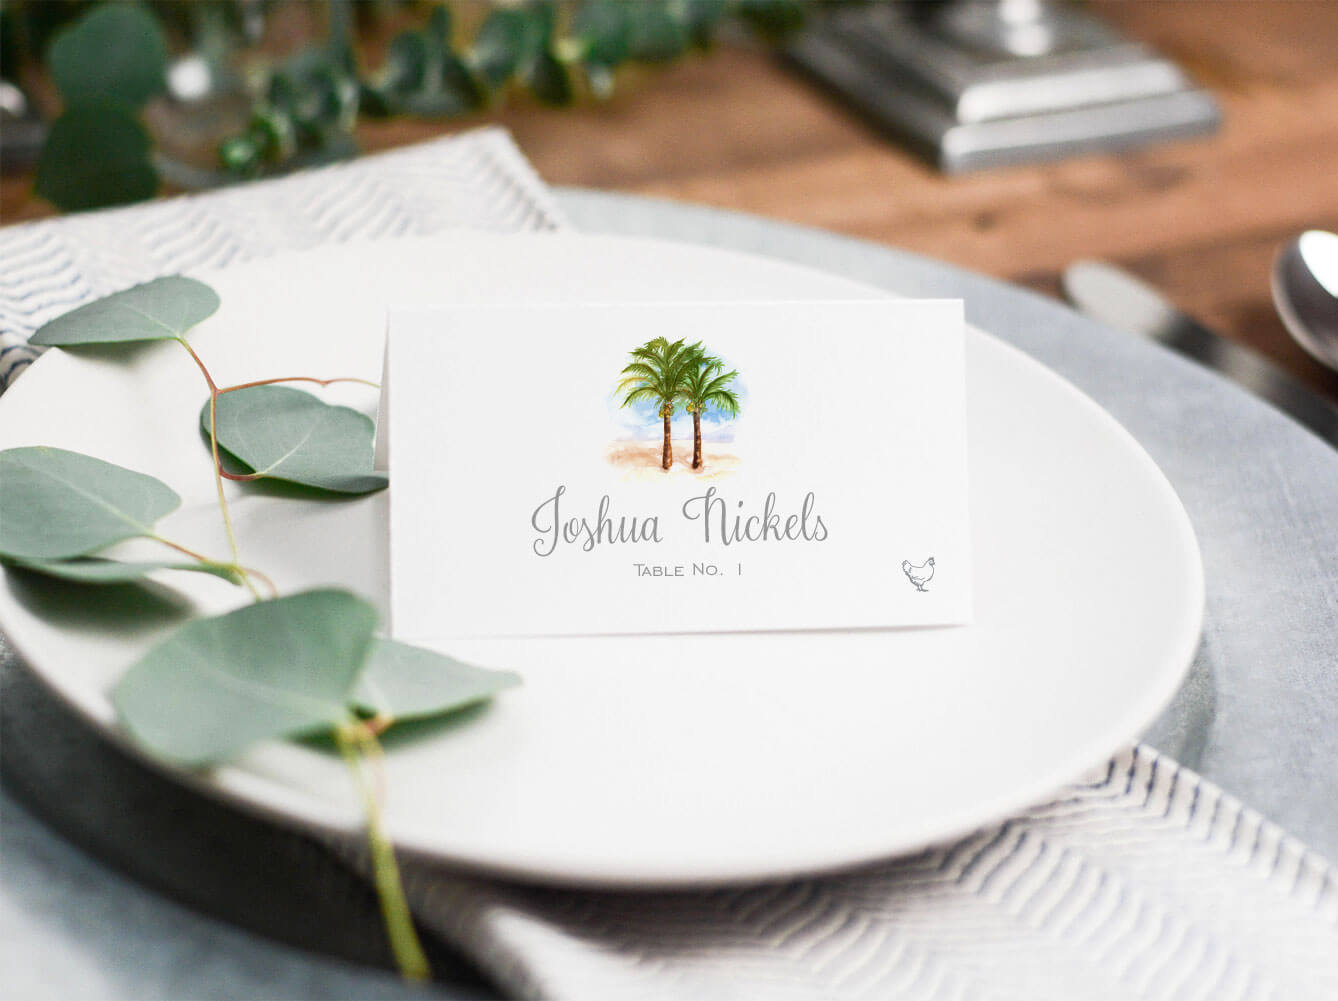 Wedding Place Cards Etiquette | Mospens Studio In Christmas Table Place Cards Template